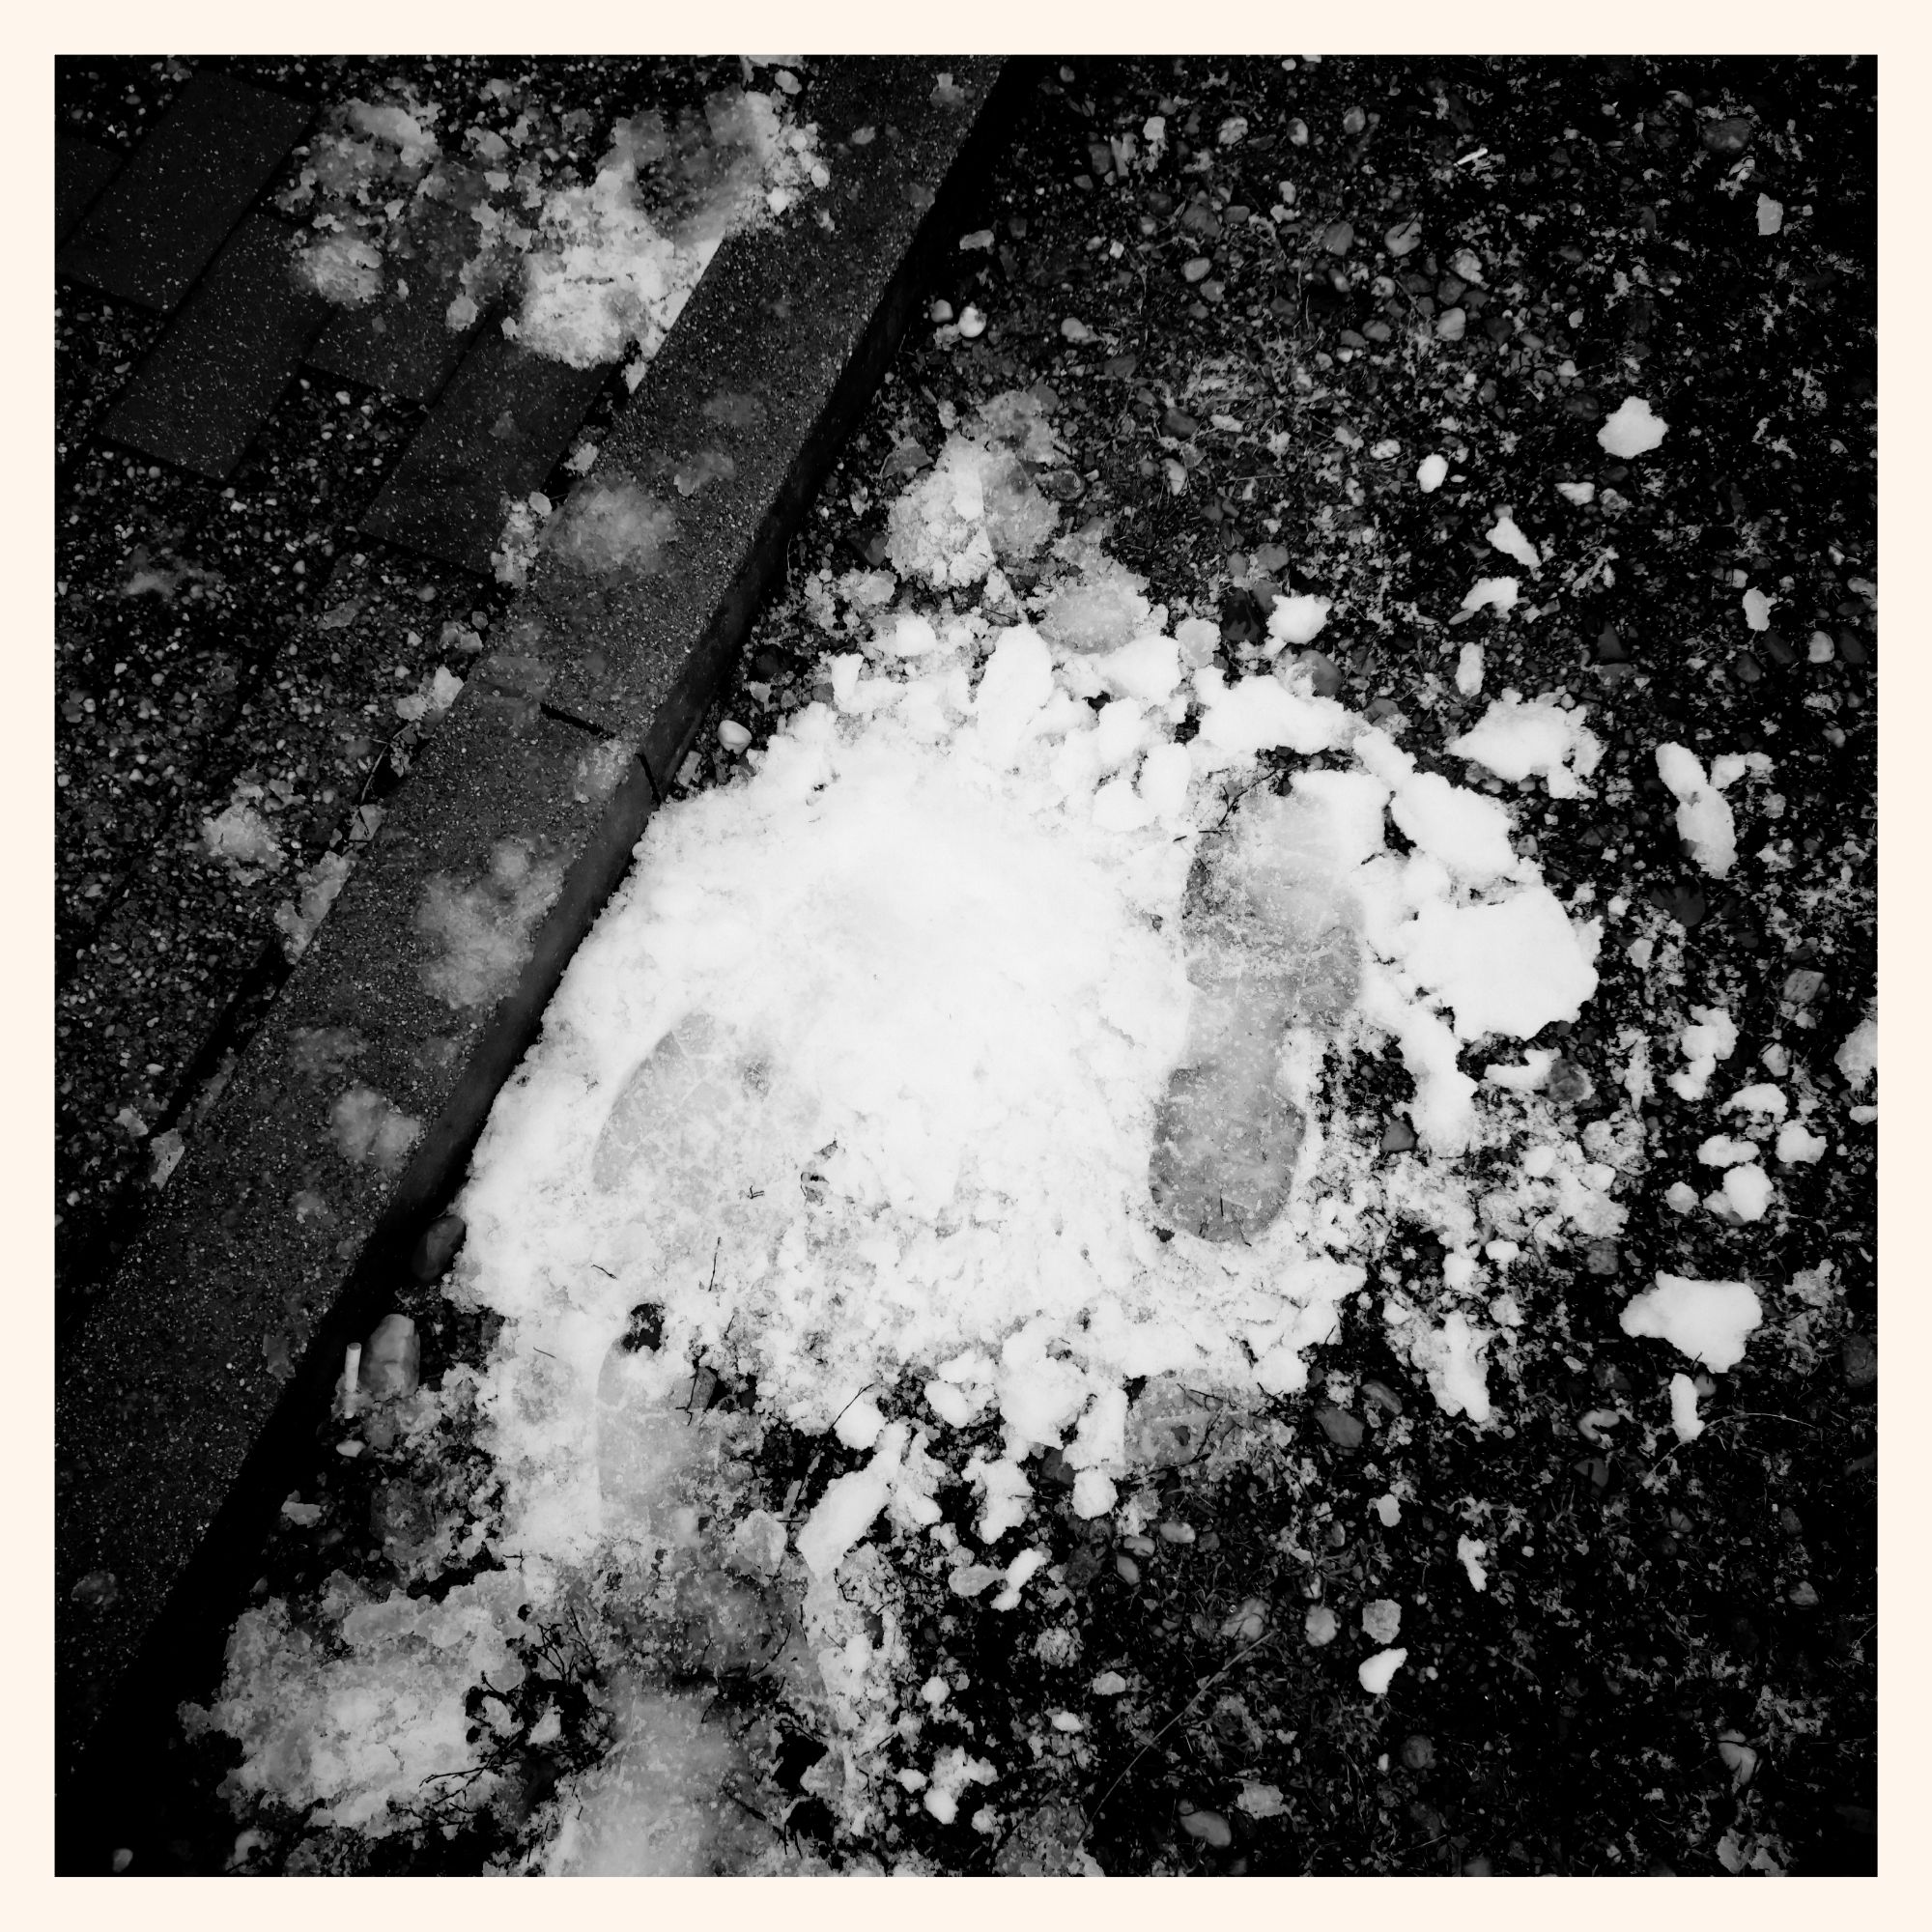 A small batch of snow with a footprint on it.